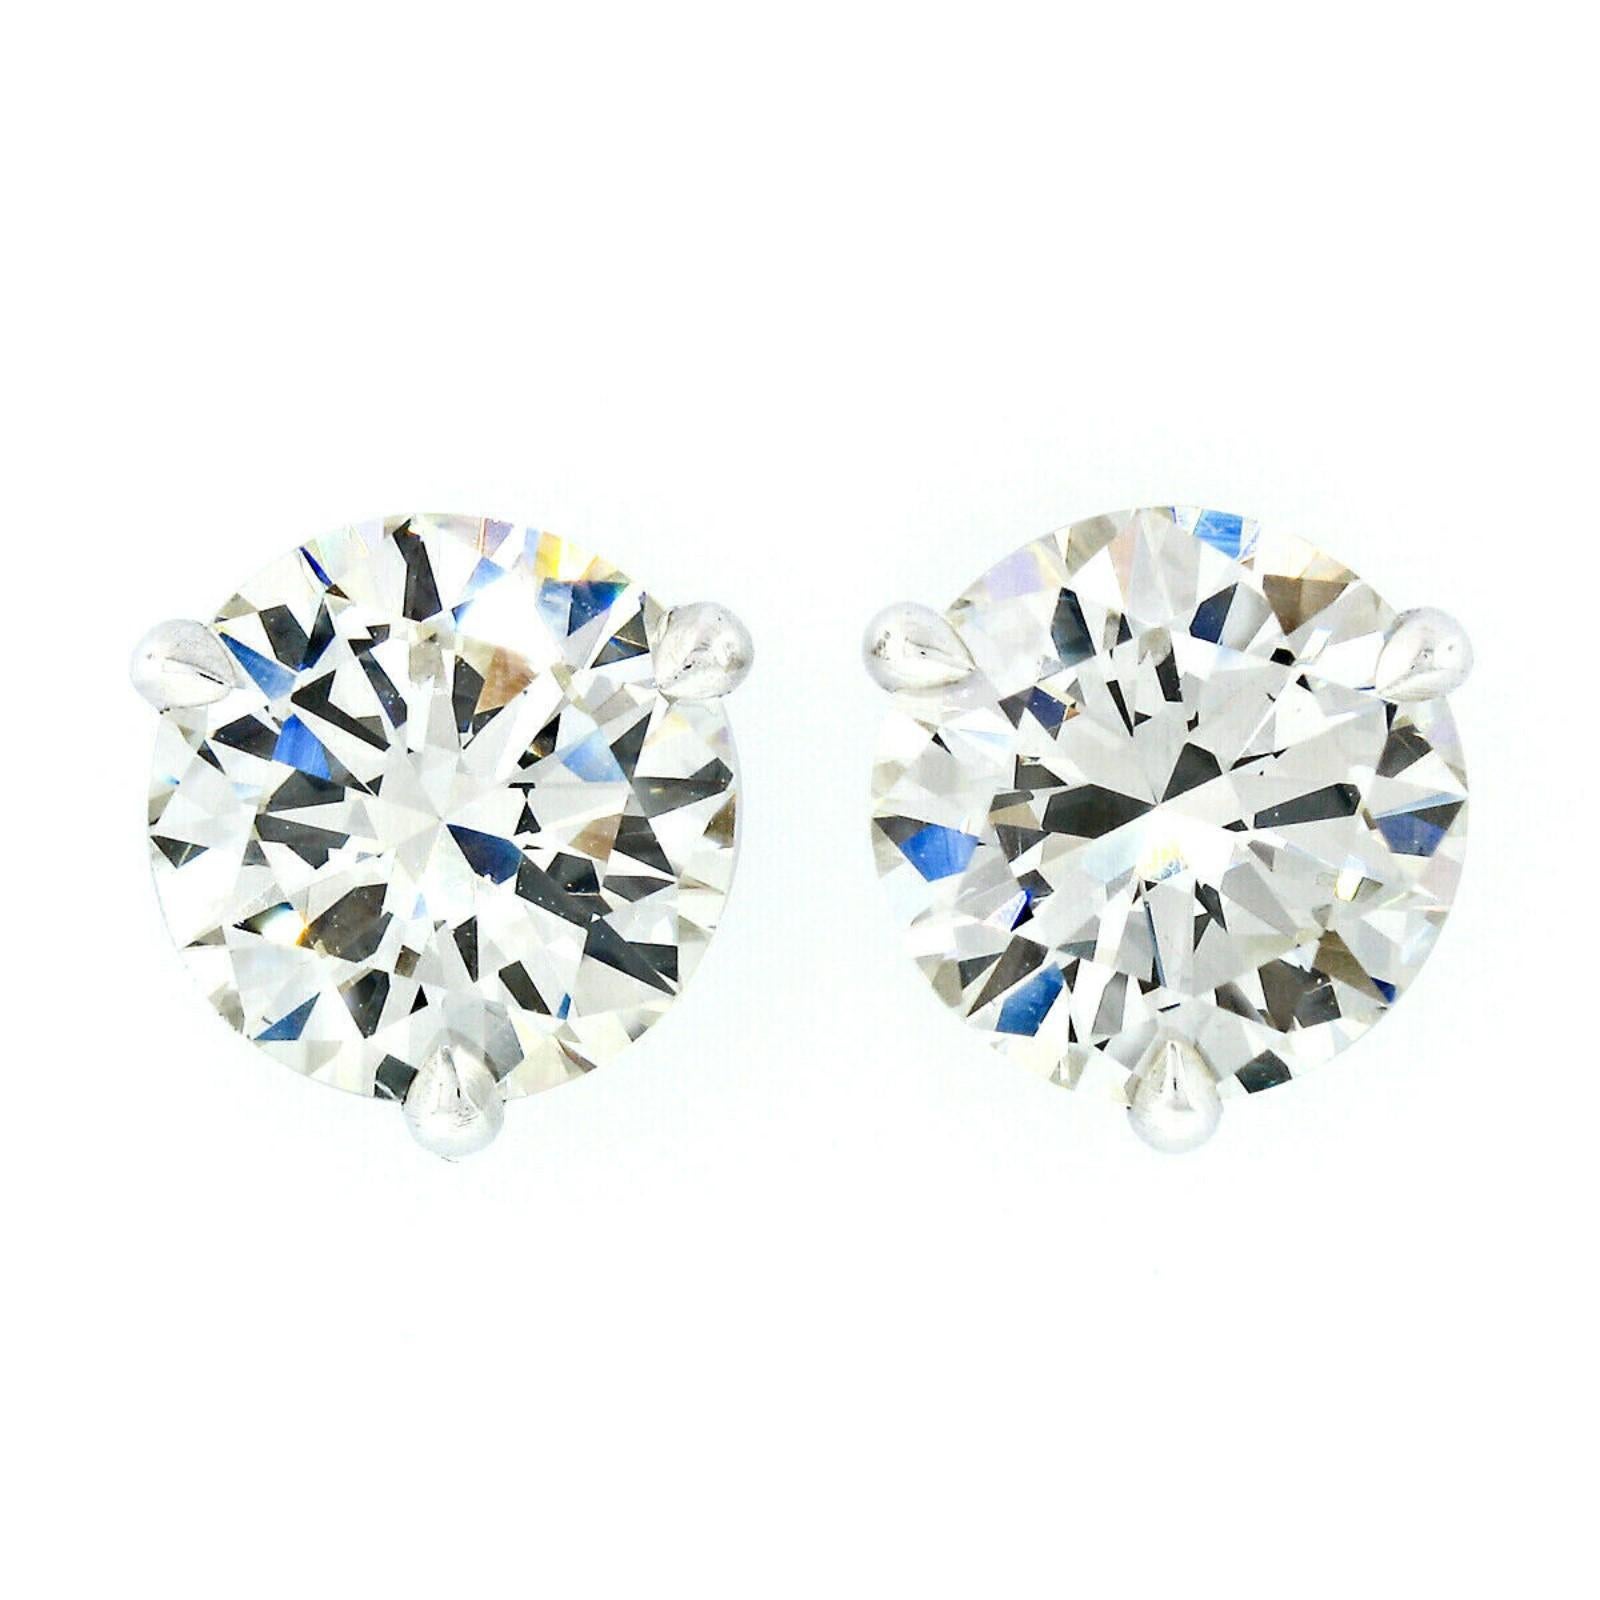 This stunning pair of diamond stud earrings was newly crafted from solid 14k white gold and features two exceptionally brilliant and fiery GIA certified round diamonds. The diamonds total exactly 3.03 carats in weight with K/L color - facing up